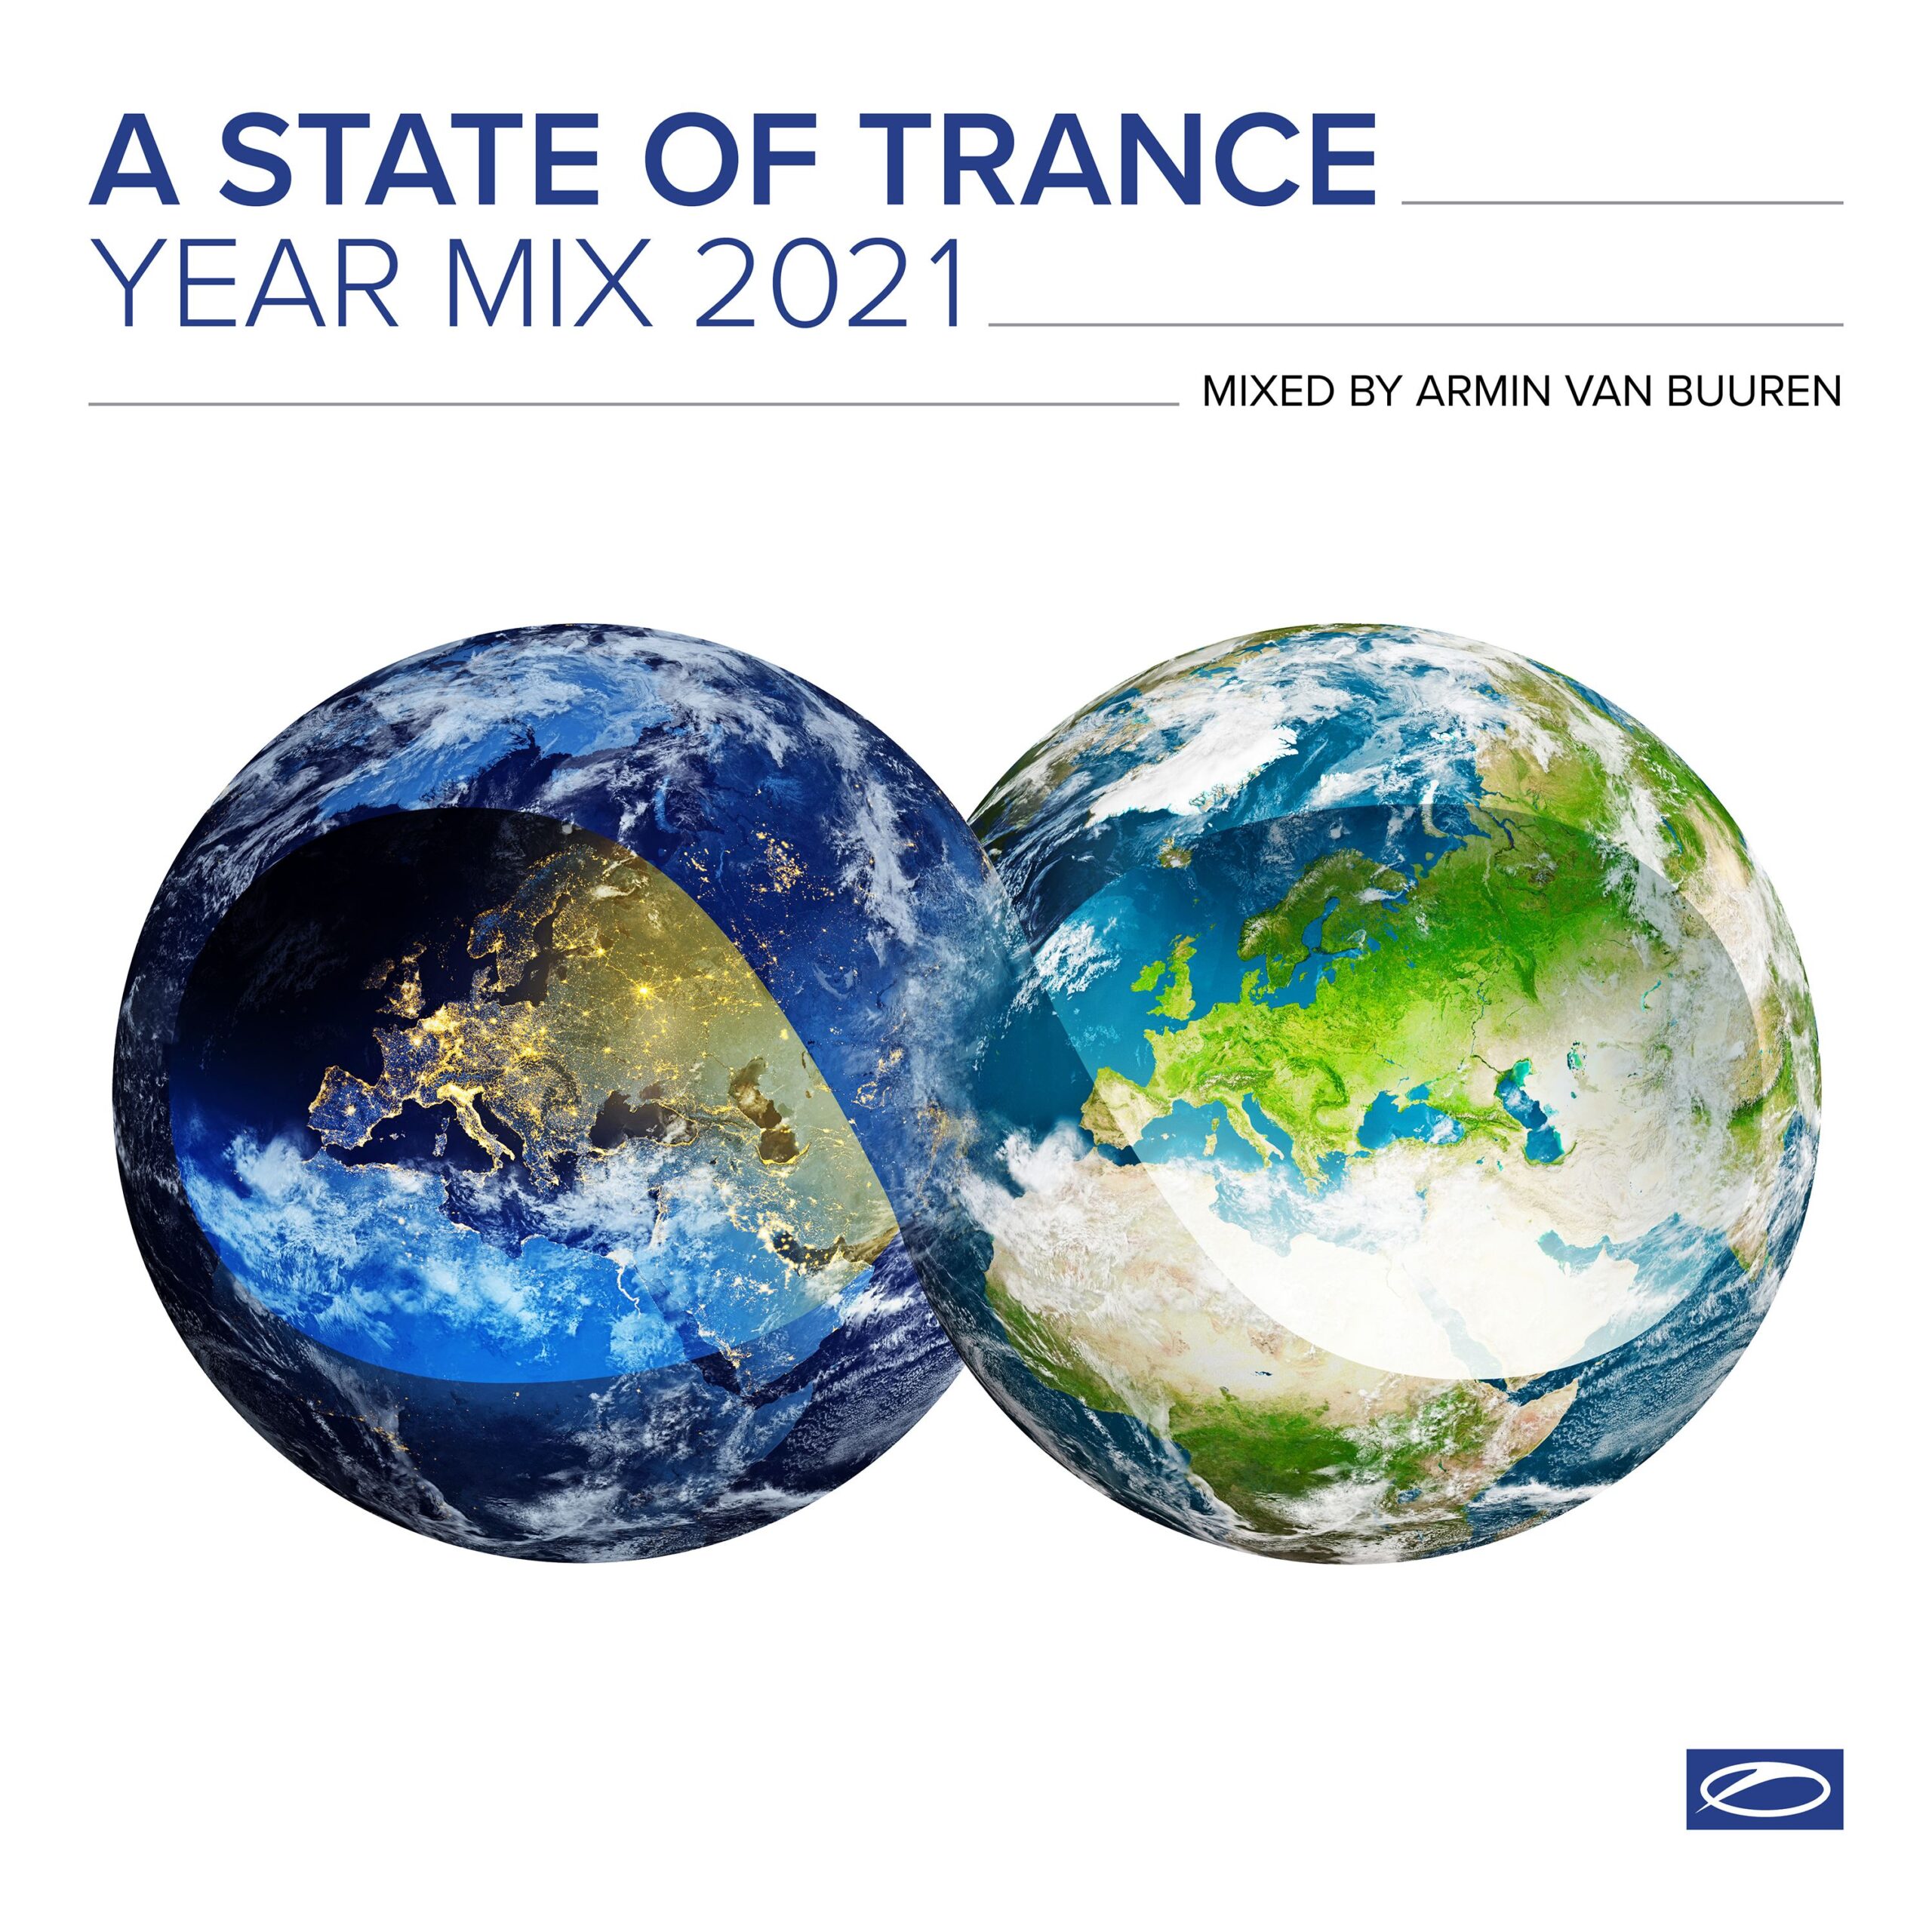 Various Artists presents  A State Of Trance Year Mix 2021 (Mixed by Armin van Buuren) on Armada Music